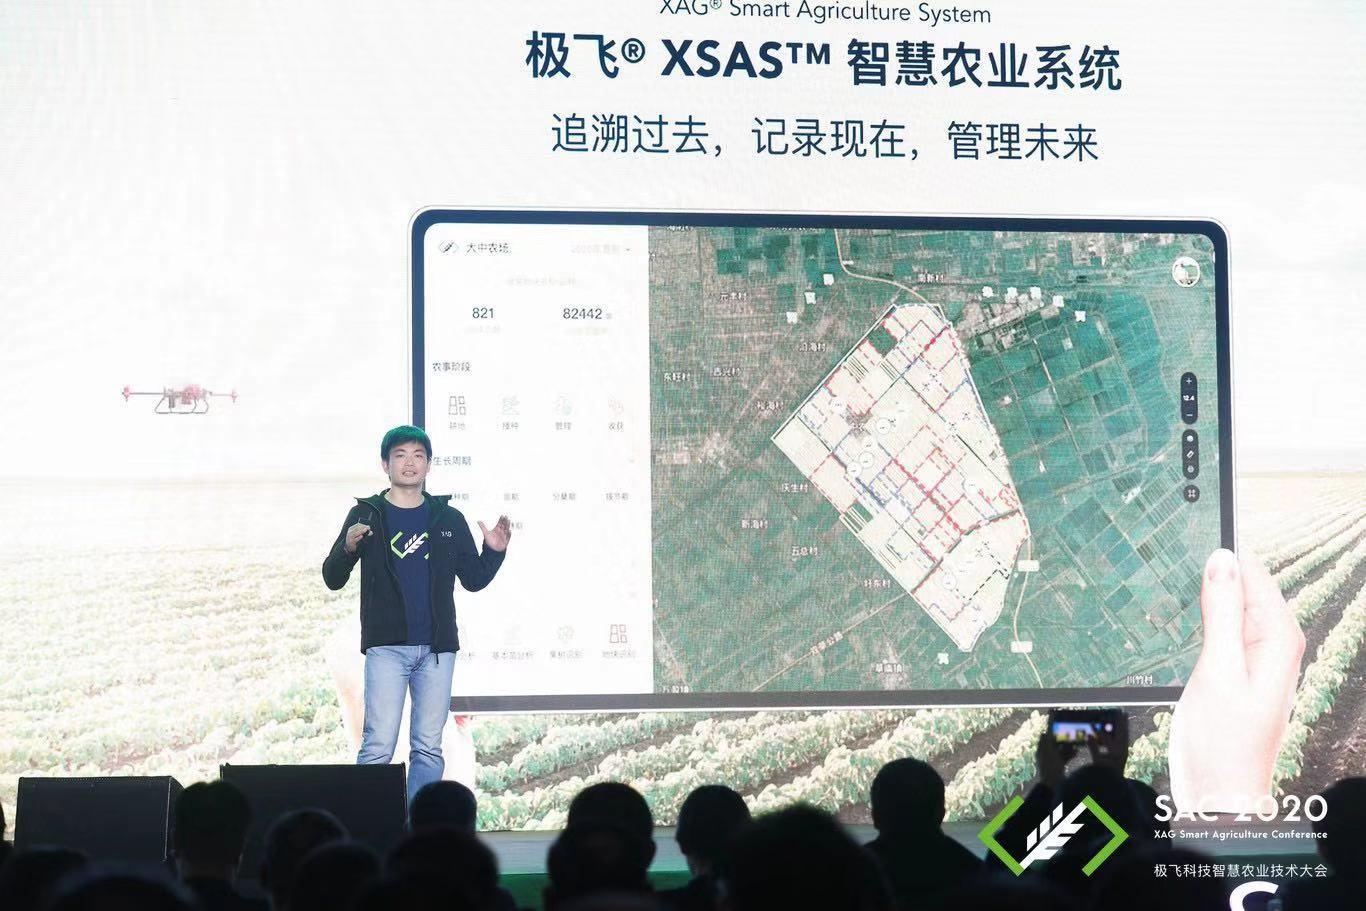 Peng Bin, CEO and Founder of XAG, introduced XAG Smart Agriculture System